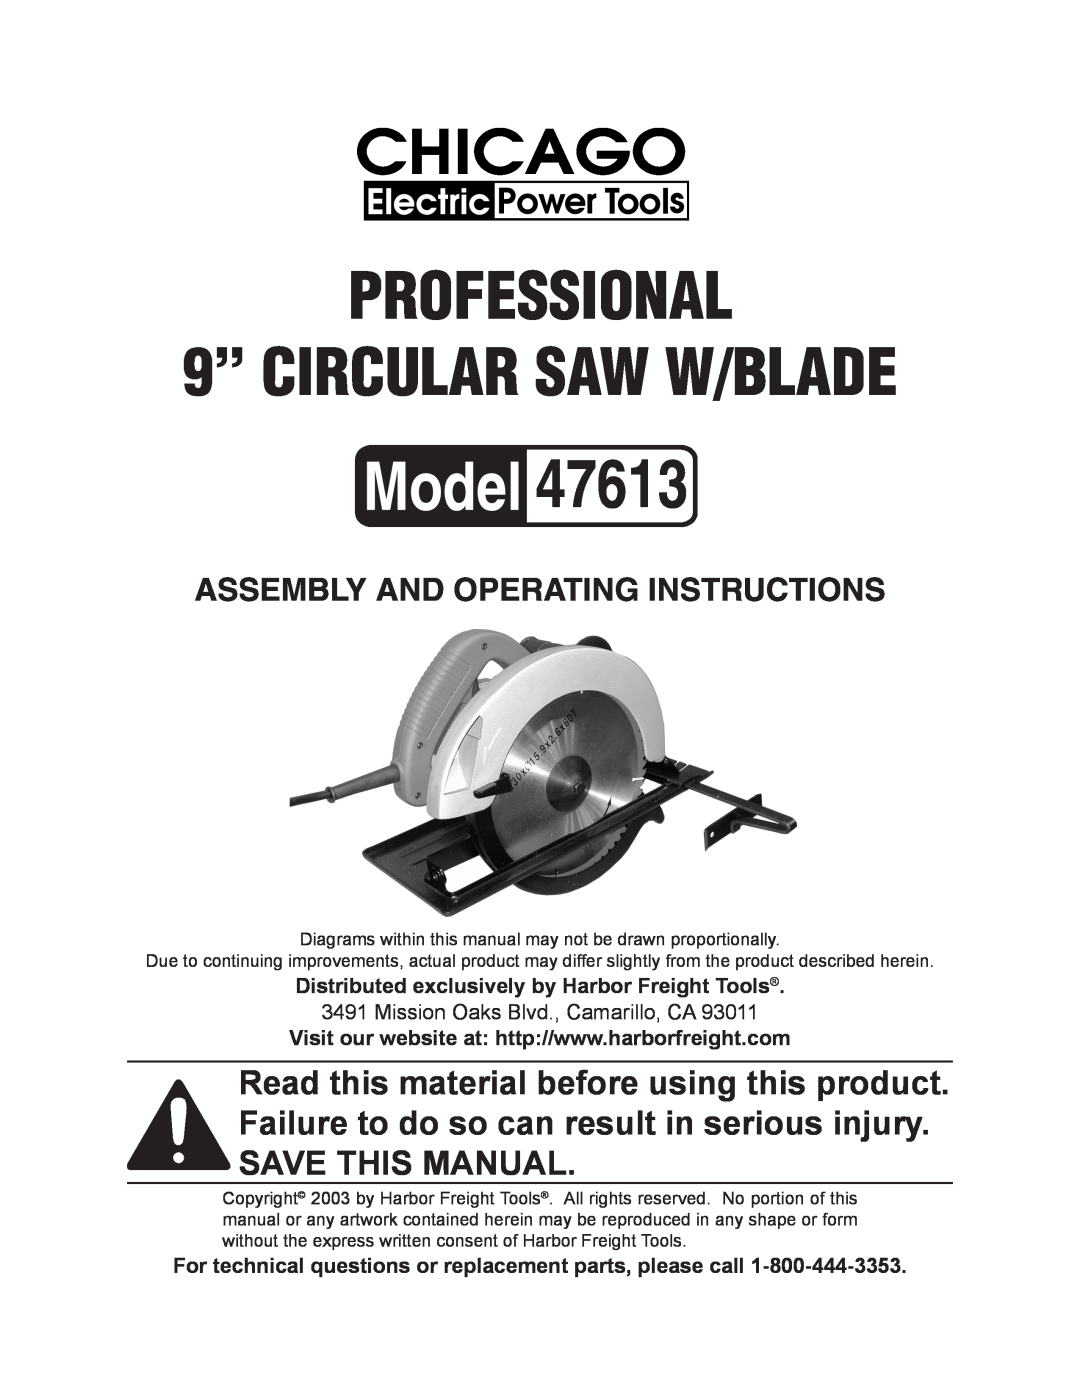 Harbor Freight Tools 47613 operating instructions PROFESSIONAL 9” CIRCULAR SAW W/BLADE 